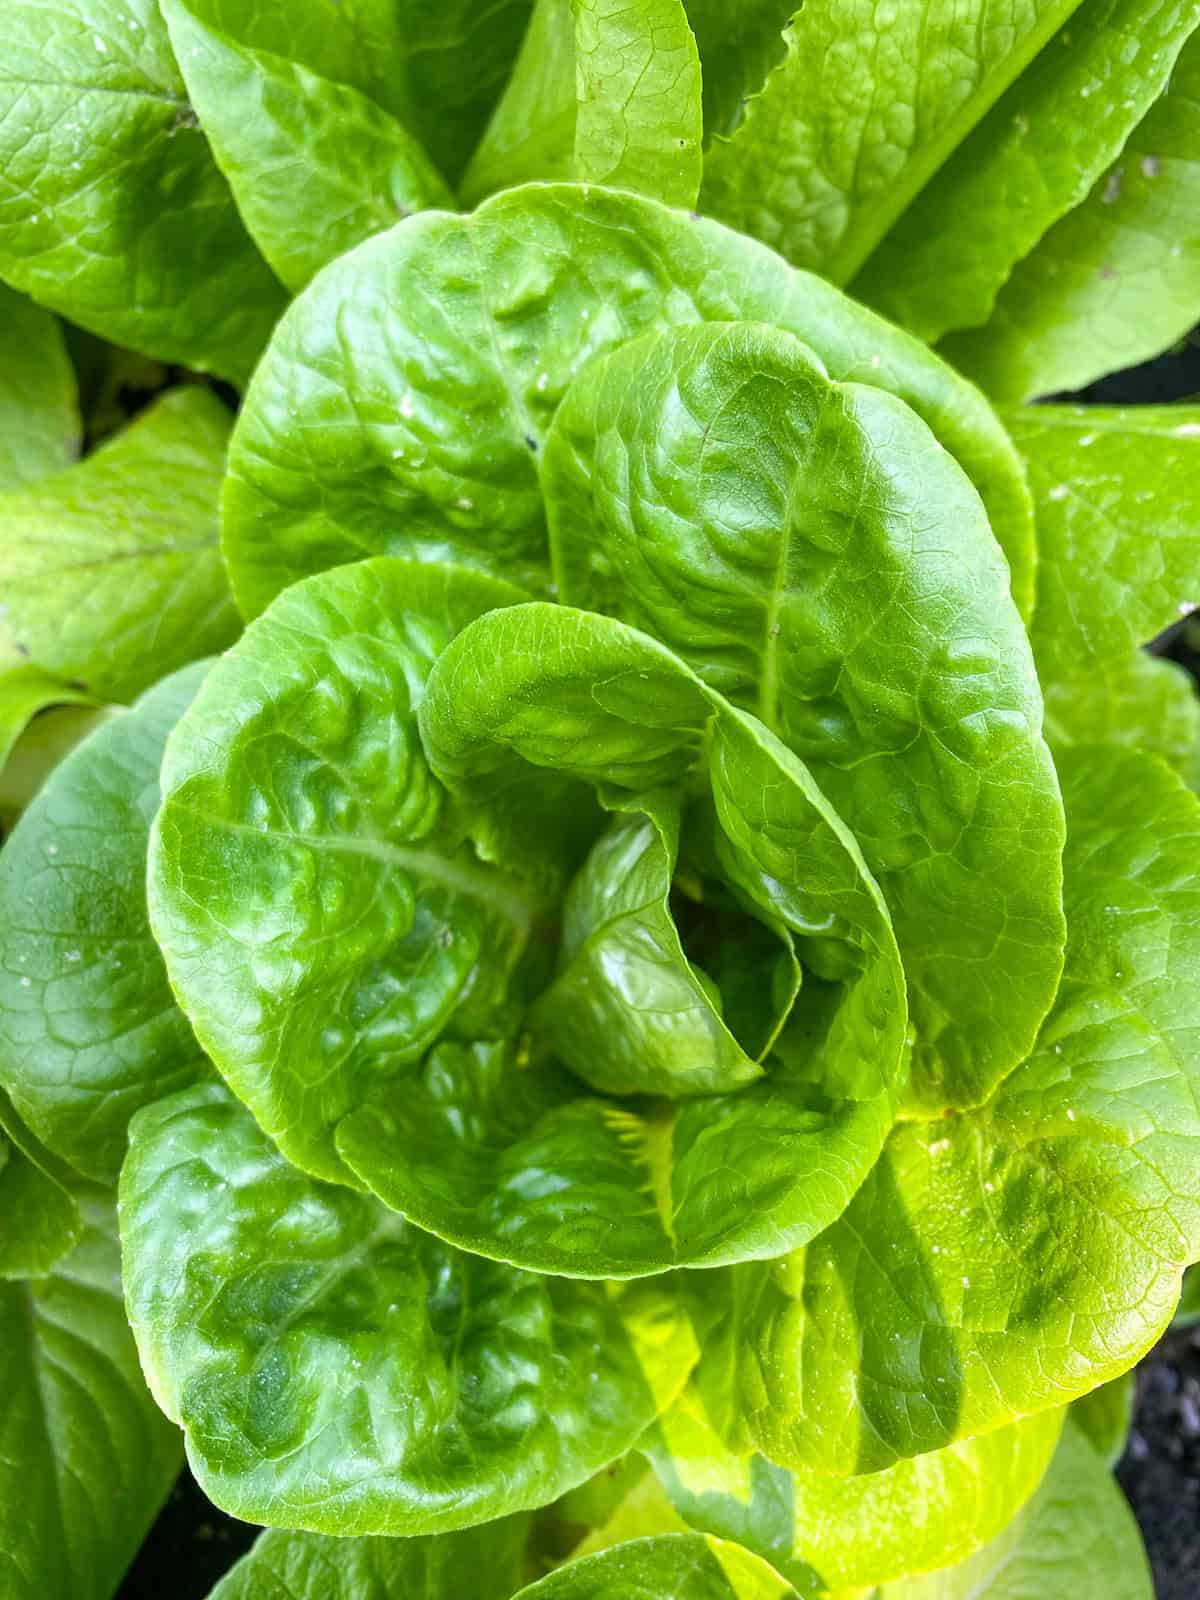 A close up of the interior of a head of romaine lettuce.